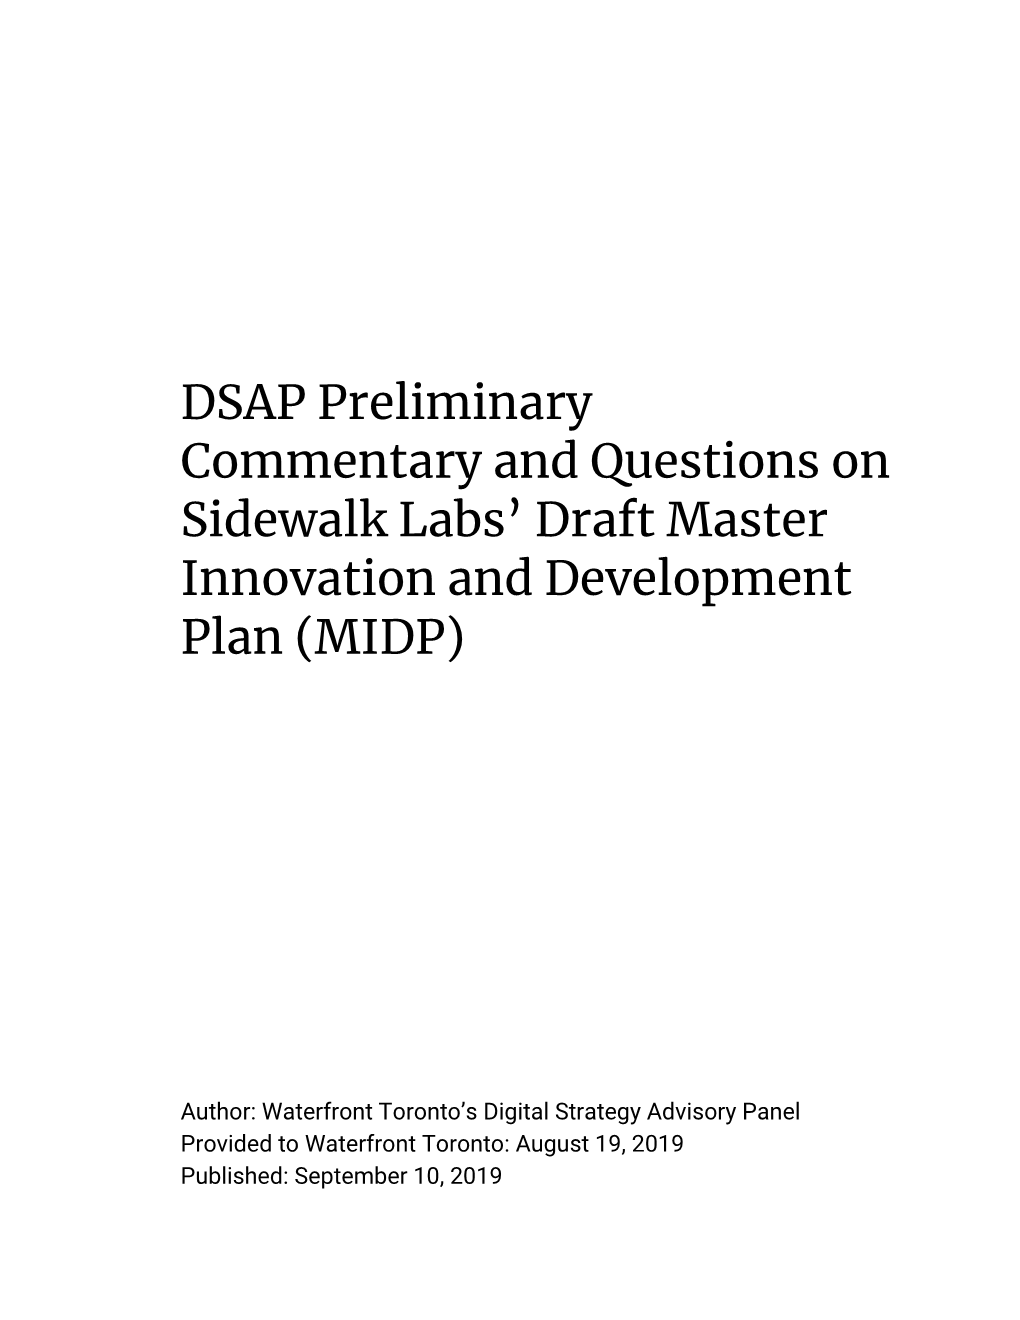 DSAP Preliminary Commentary and Questions on Sidewalk Labs' Draft